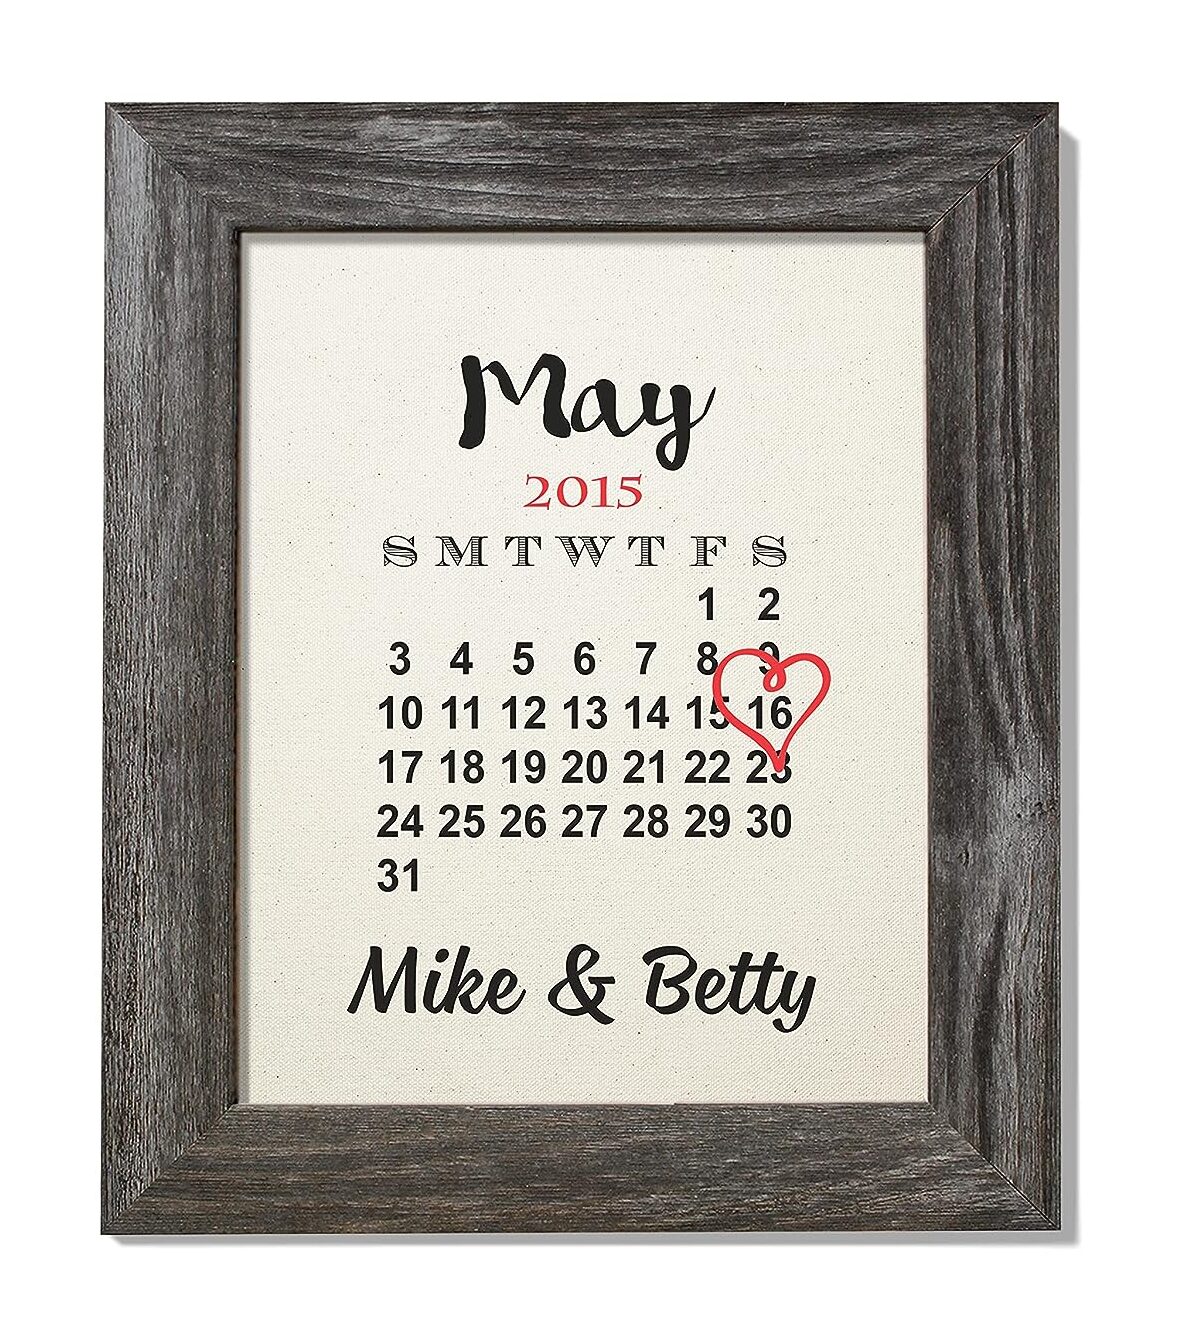 2nd Anniversary Gift for Him or Her, Wedding Date Calendar Cotton Print